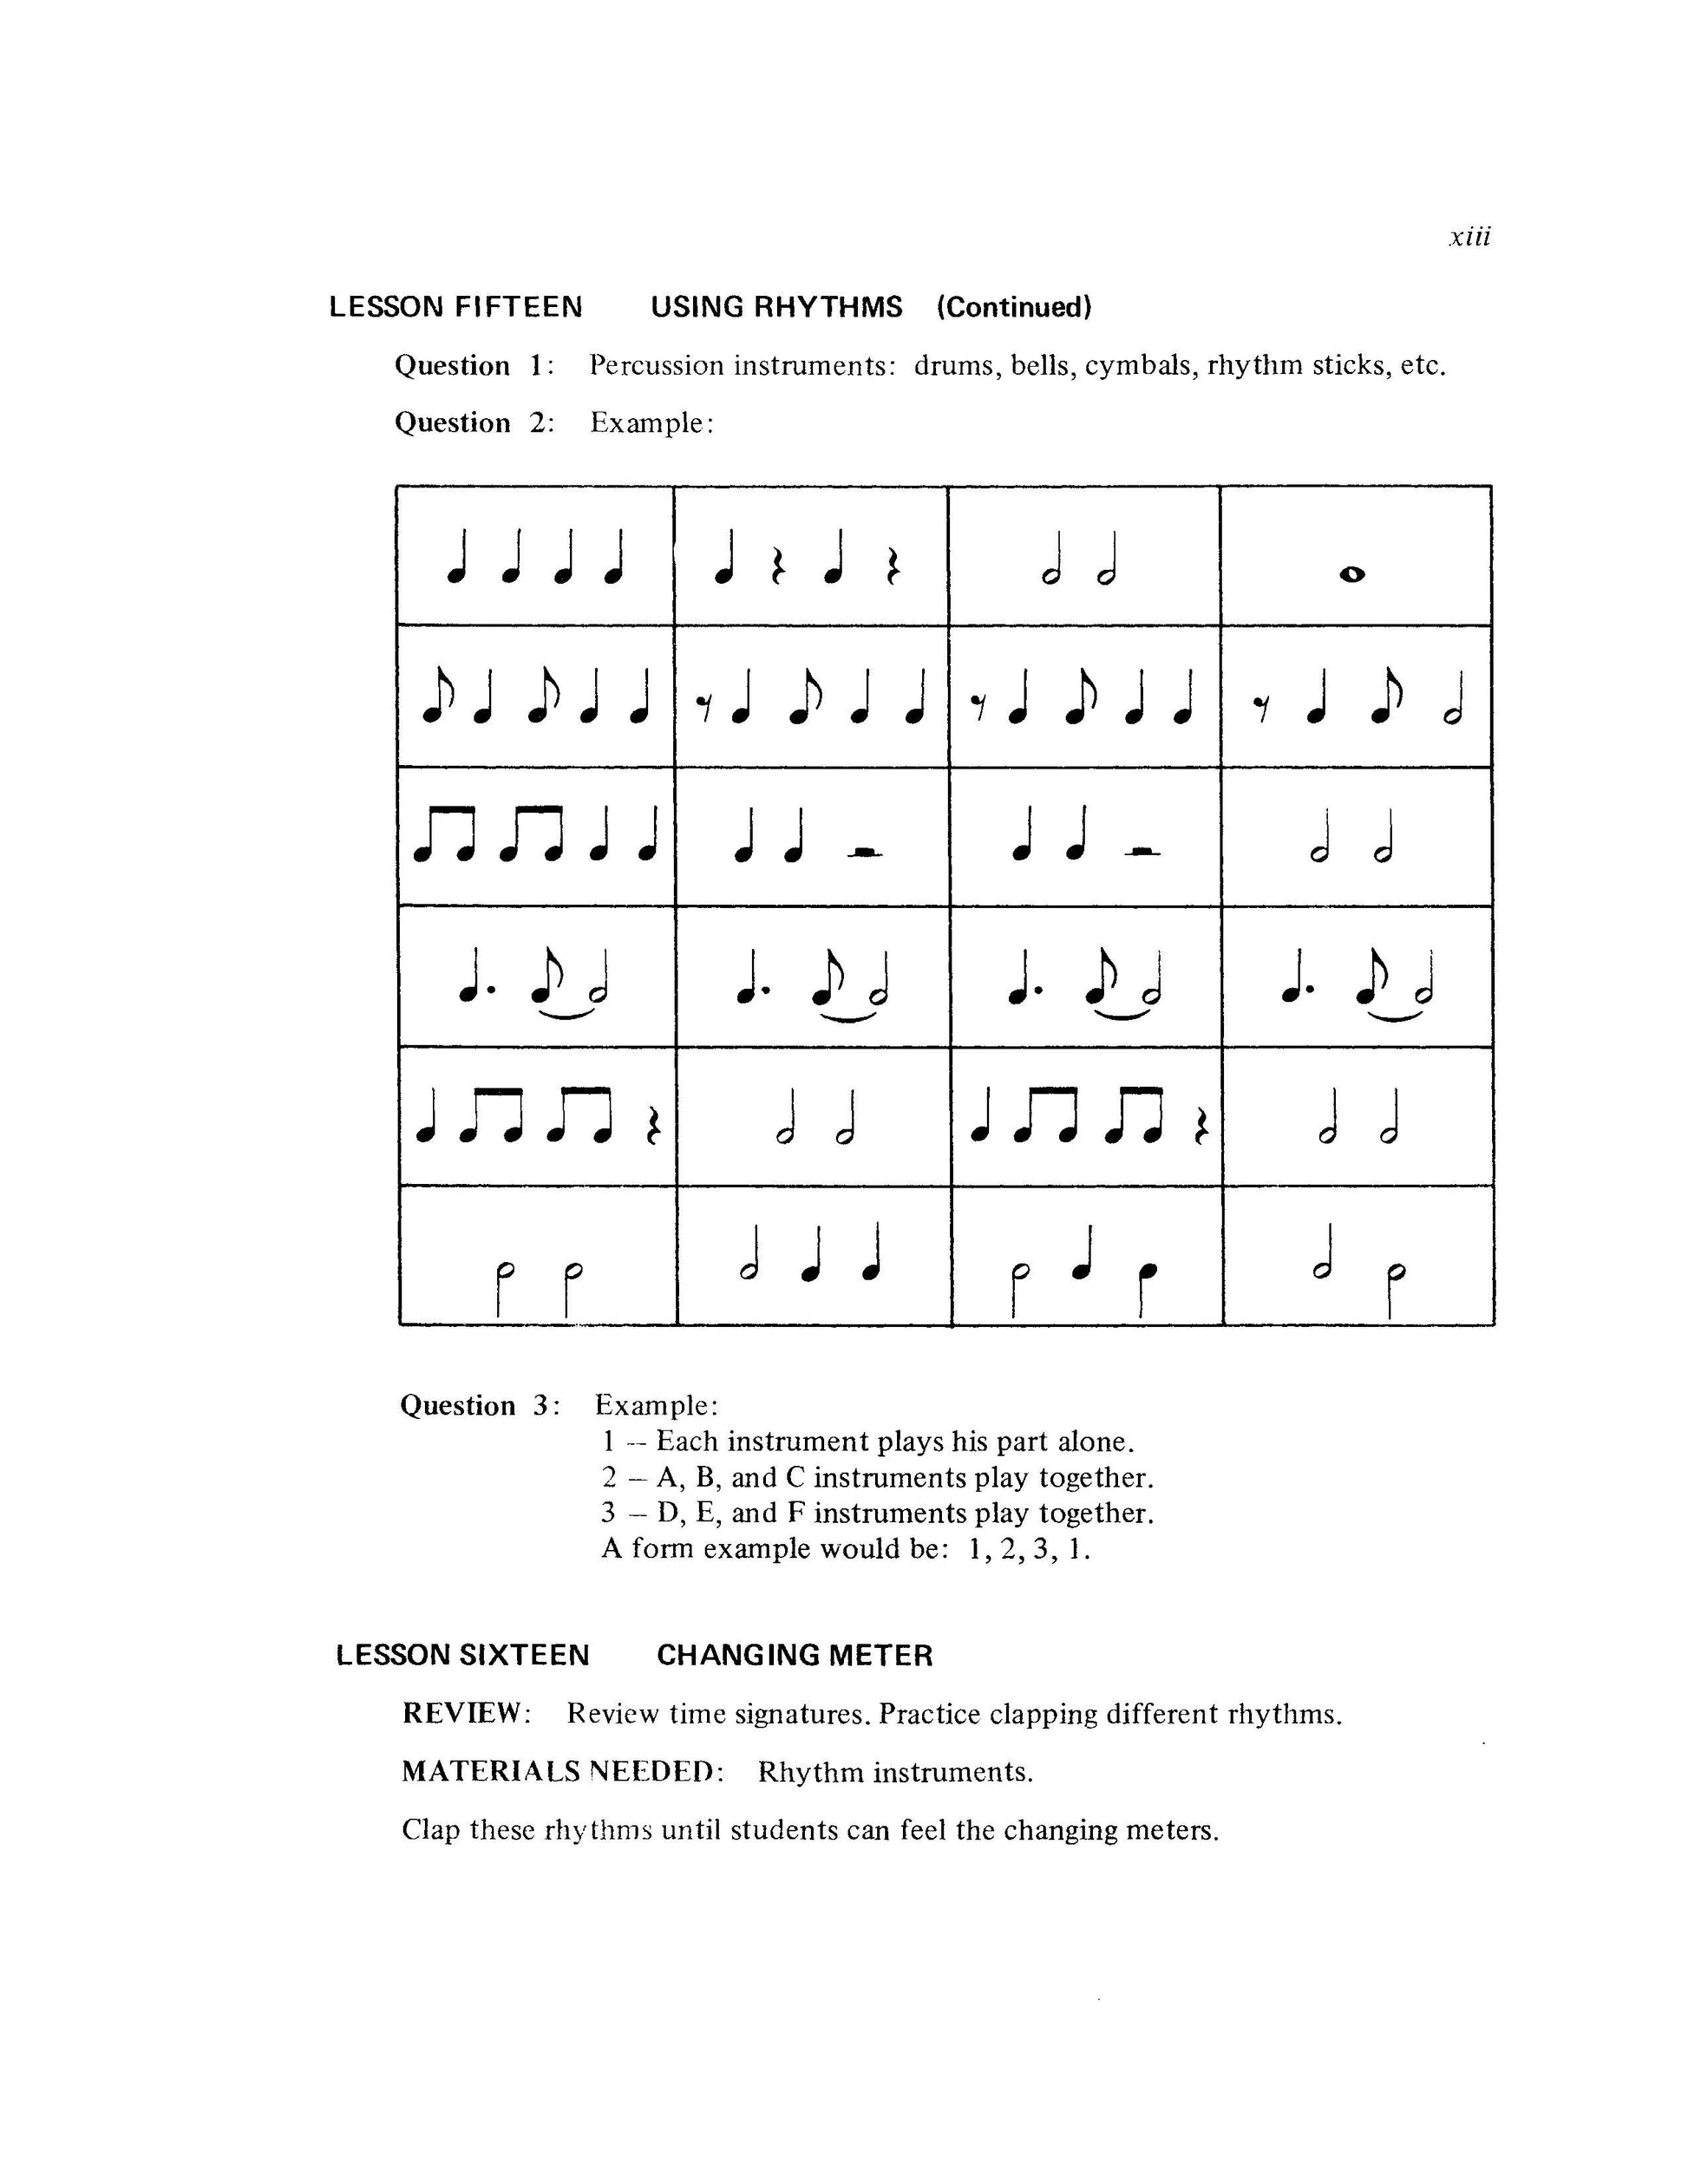 Bright Education Australia, Teacher Resources, Music, Book, Activities in Musical Composition 